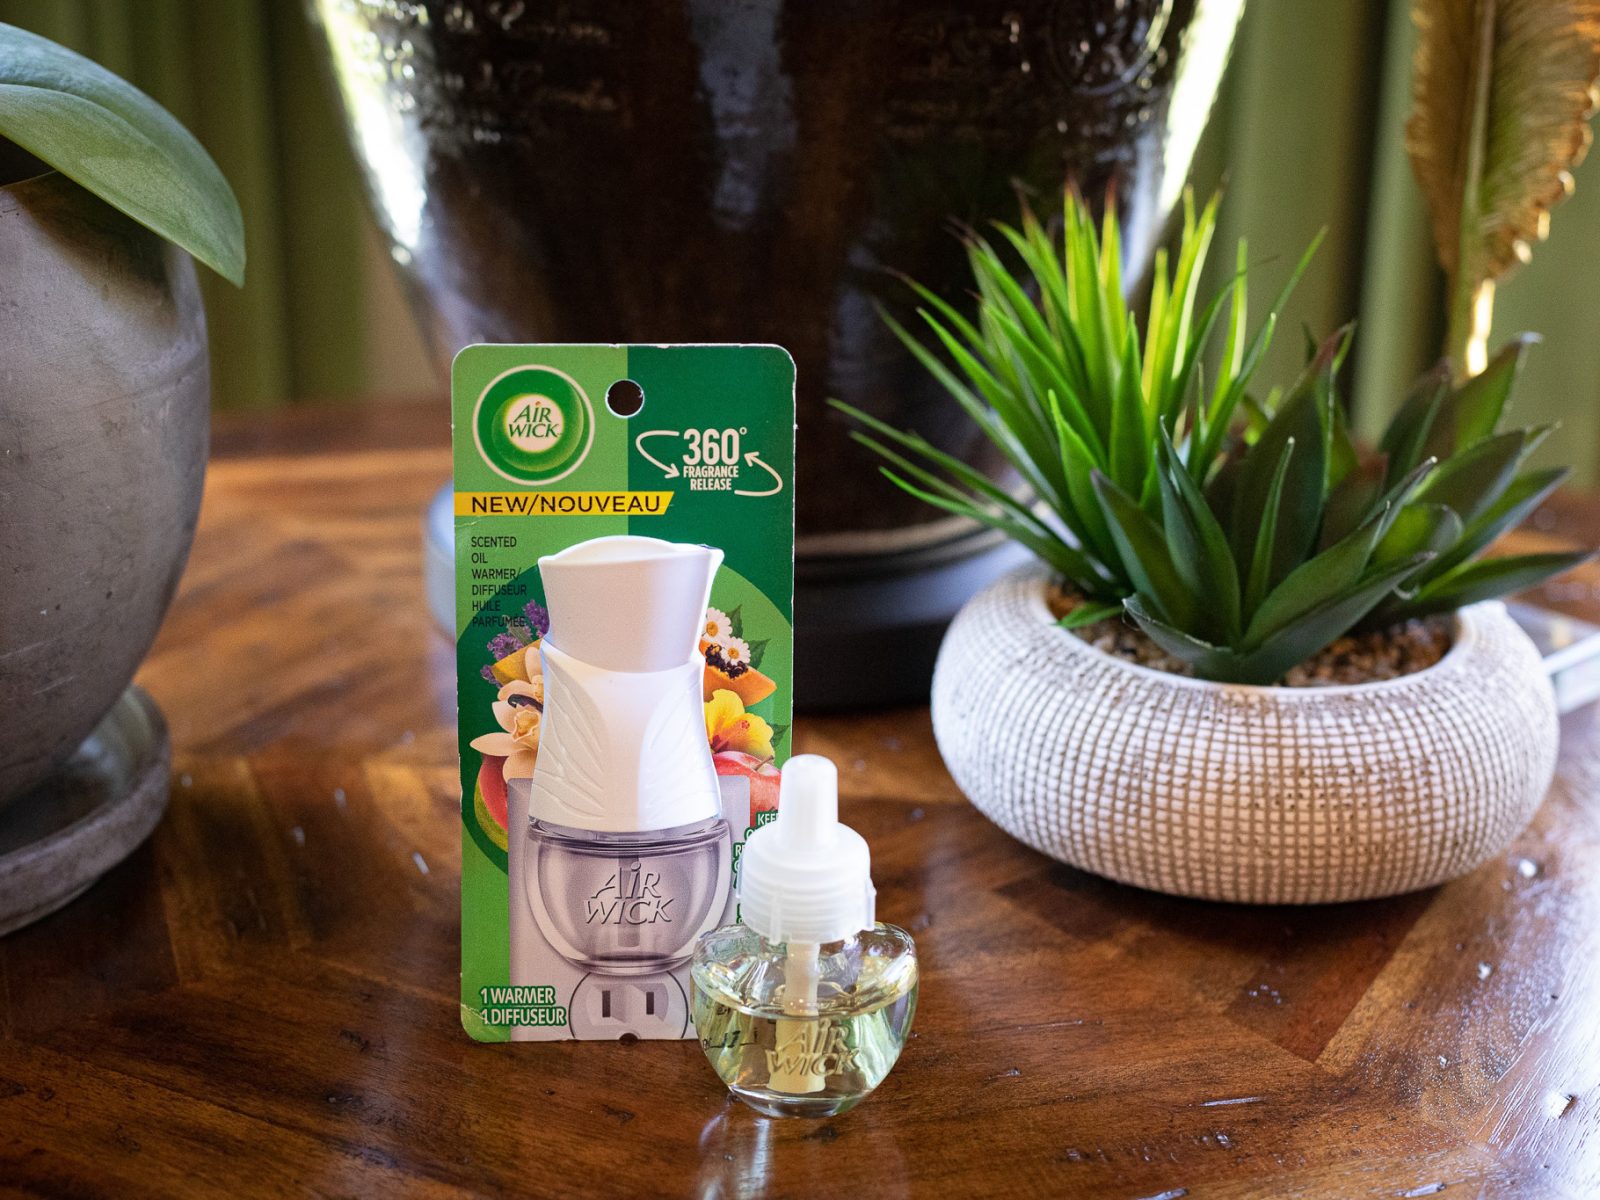 Air Wick Scented Oil Warmers 2-Pack Just $1.70 At Kroger